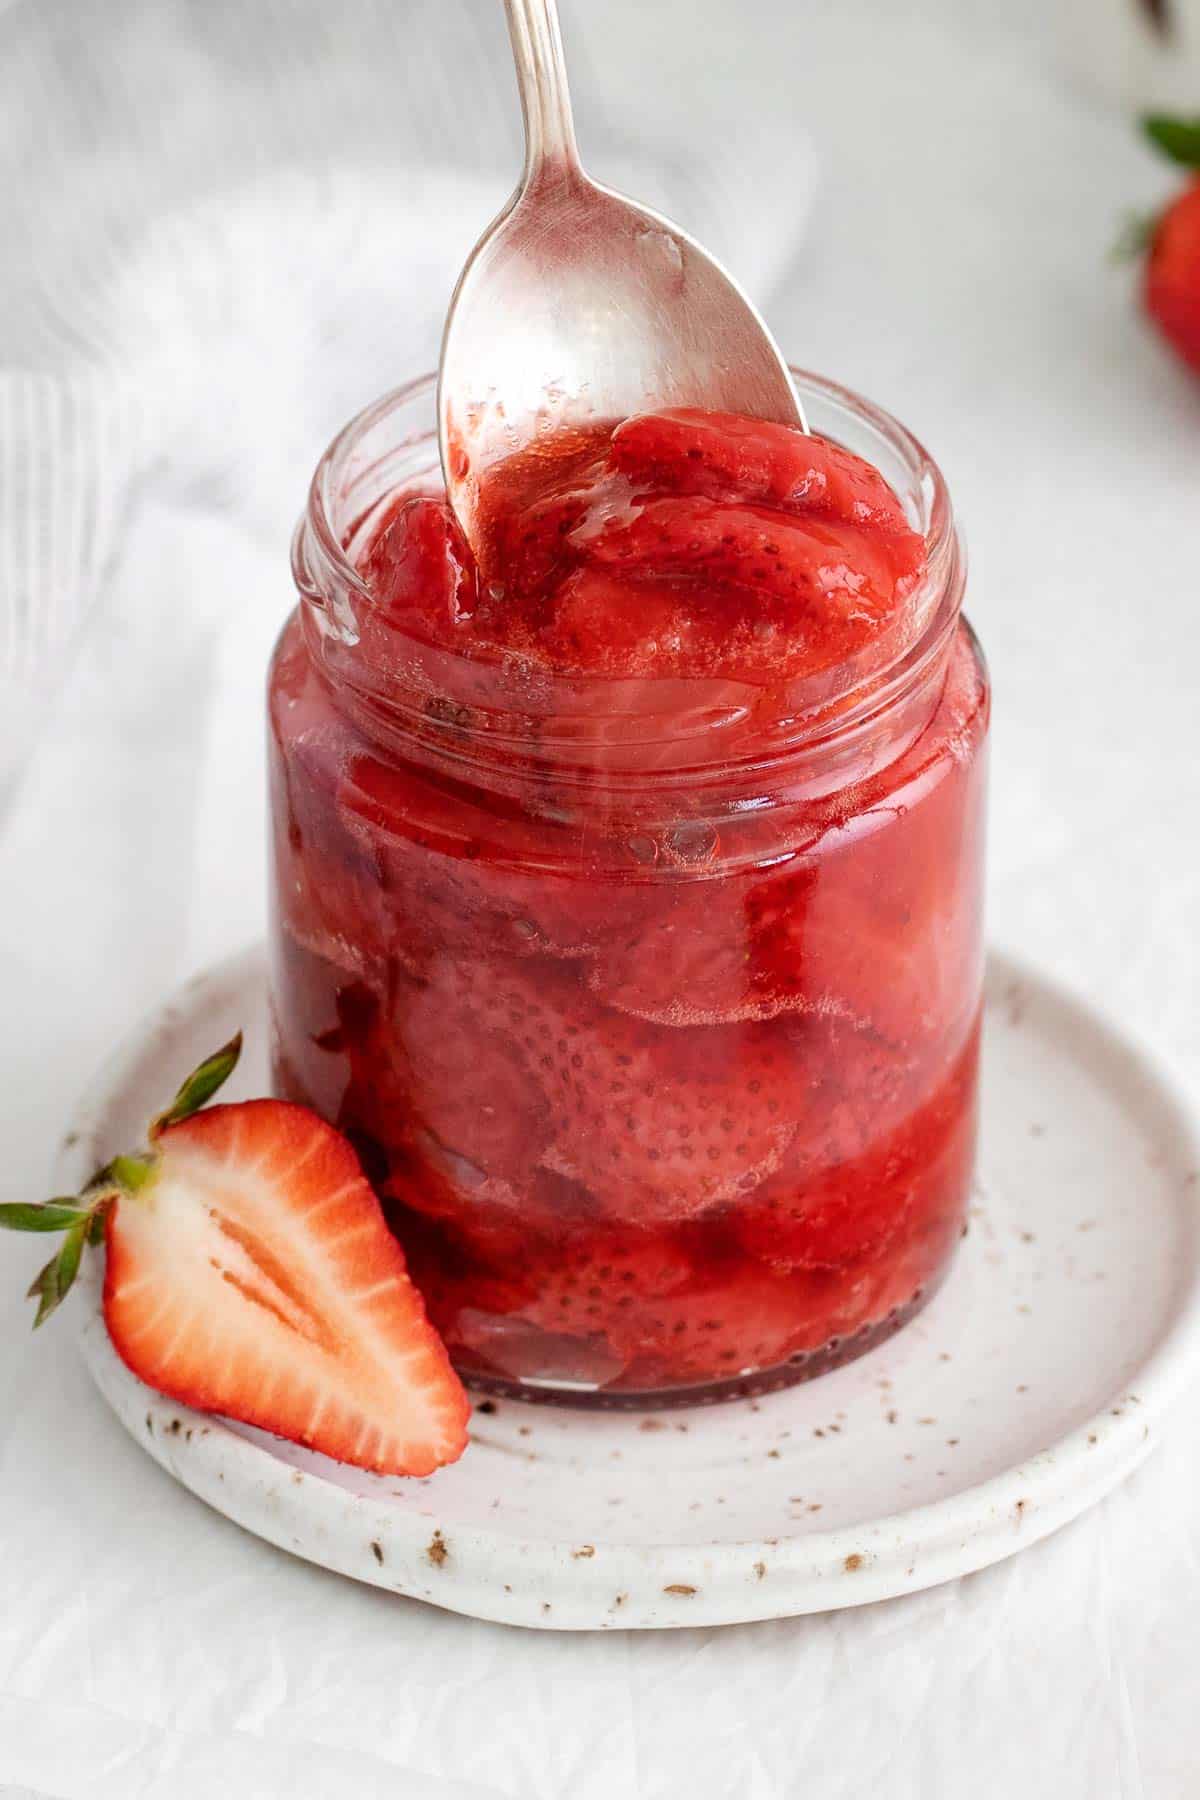 A closeup of strawberry compote in a glass jar